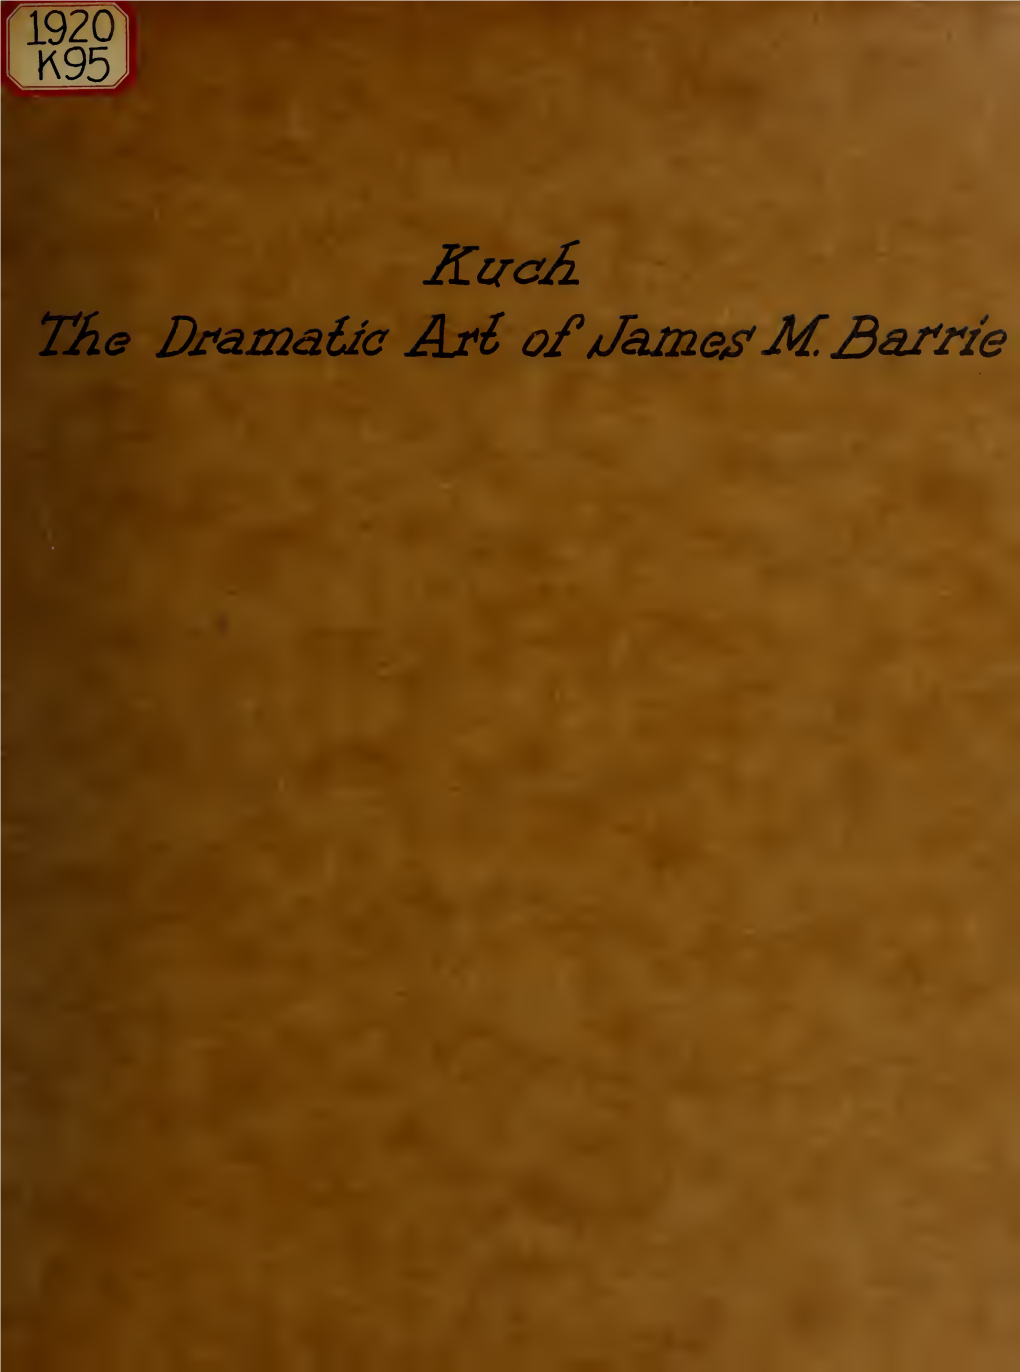 The Dramatic Art of James M. Barrie